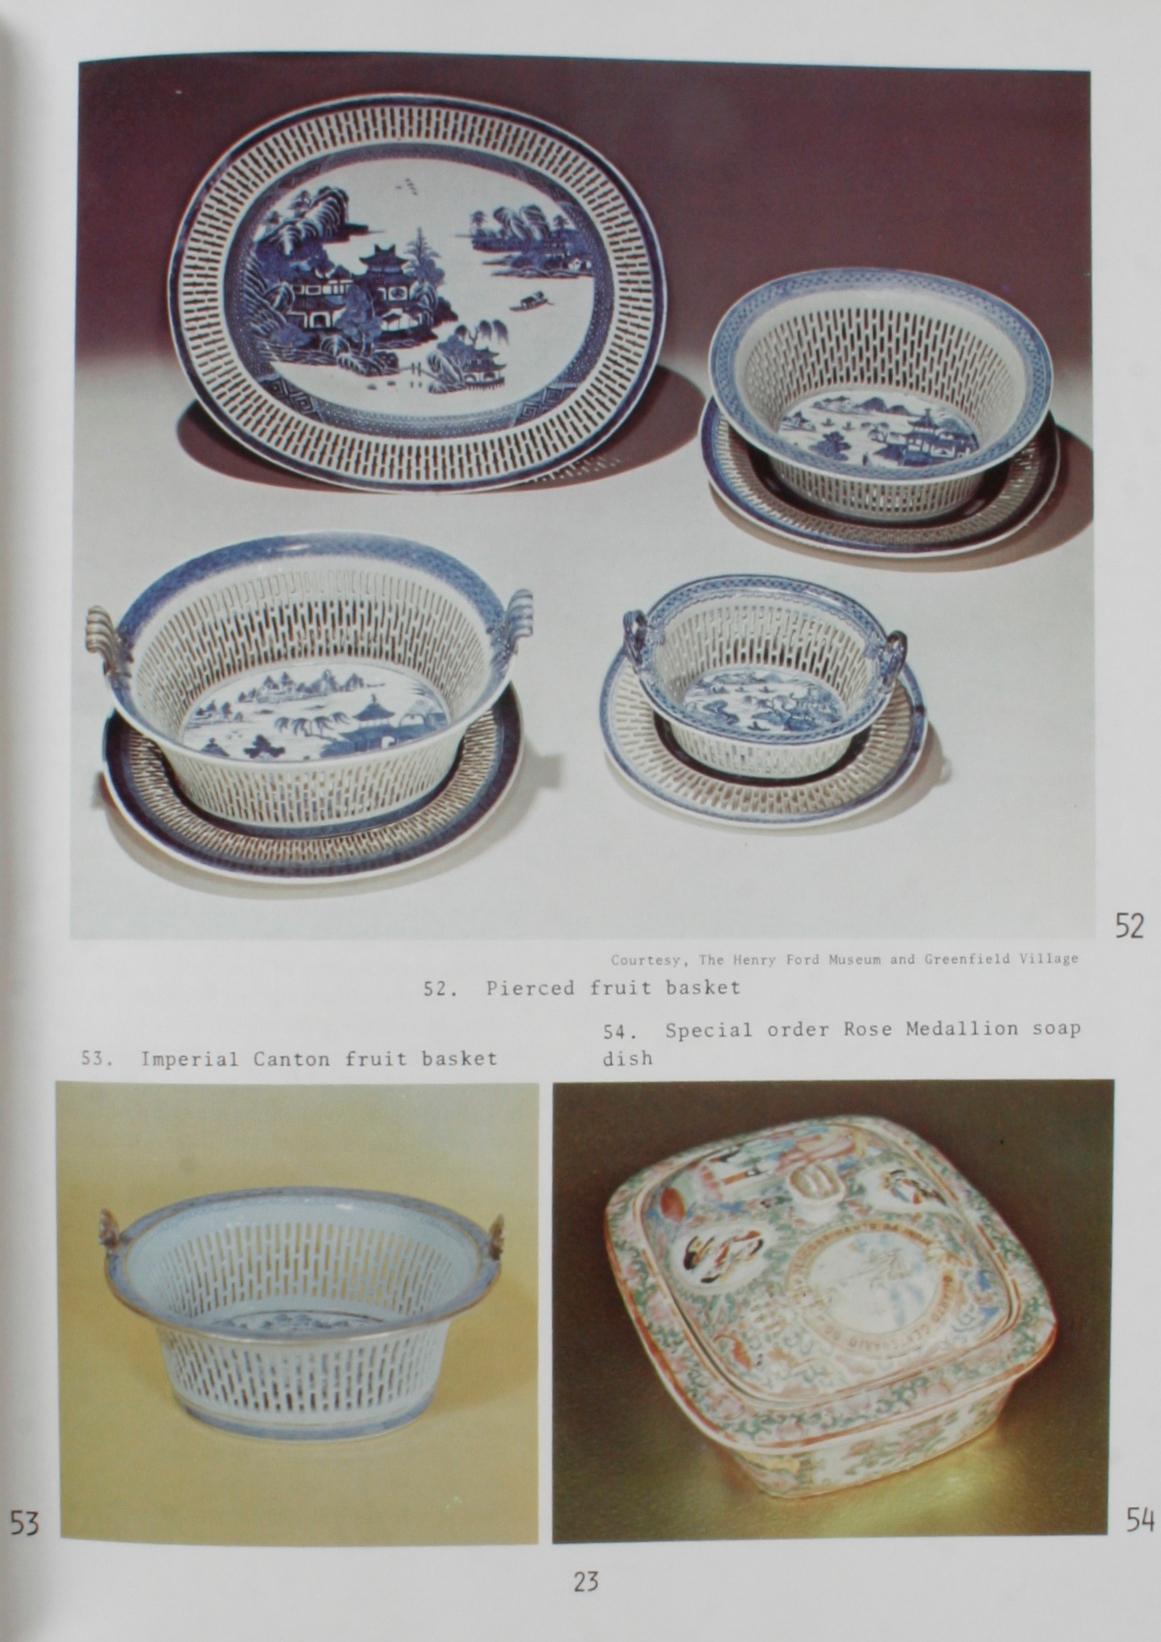 Chinese Export Porcelain, Standard Patterns and Forms, 1780-1880, First Edition For Sale 7